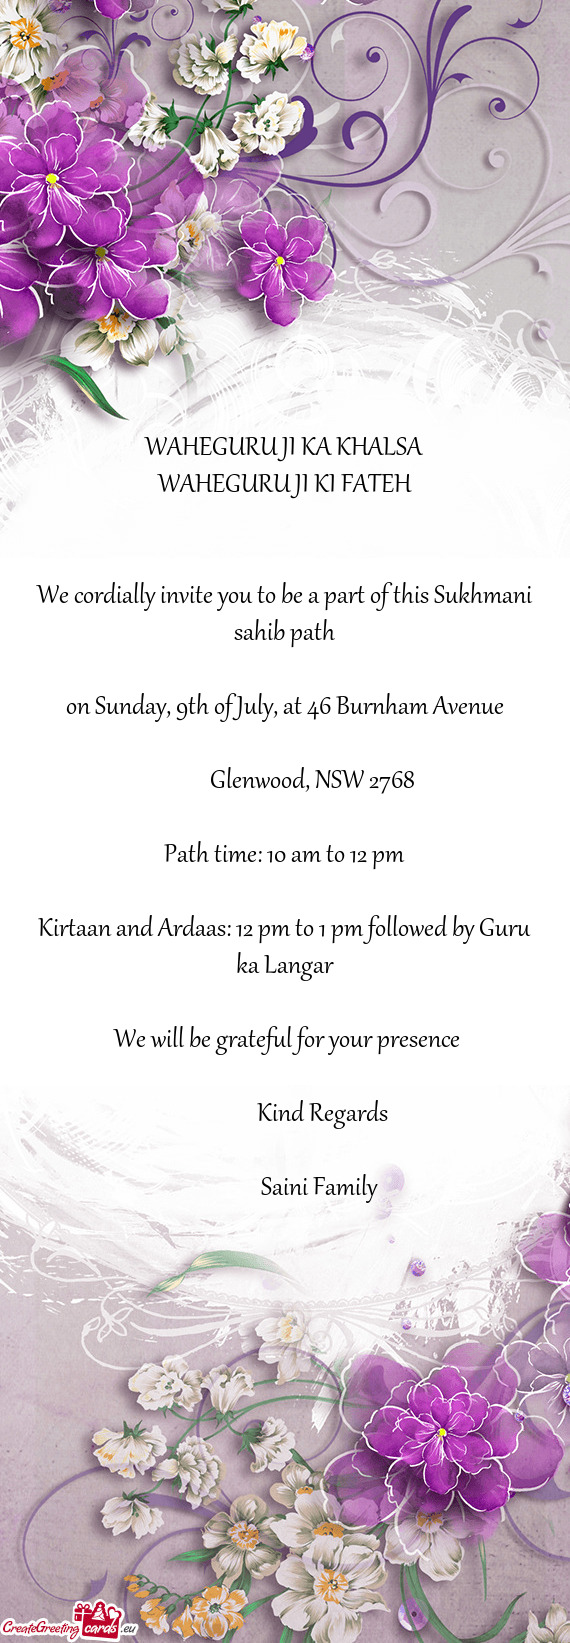 We cordially invite you to be a part of this Sukhmani sahib path